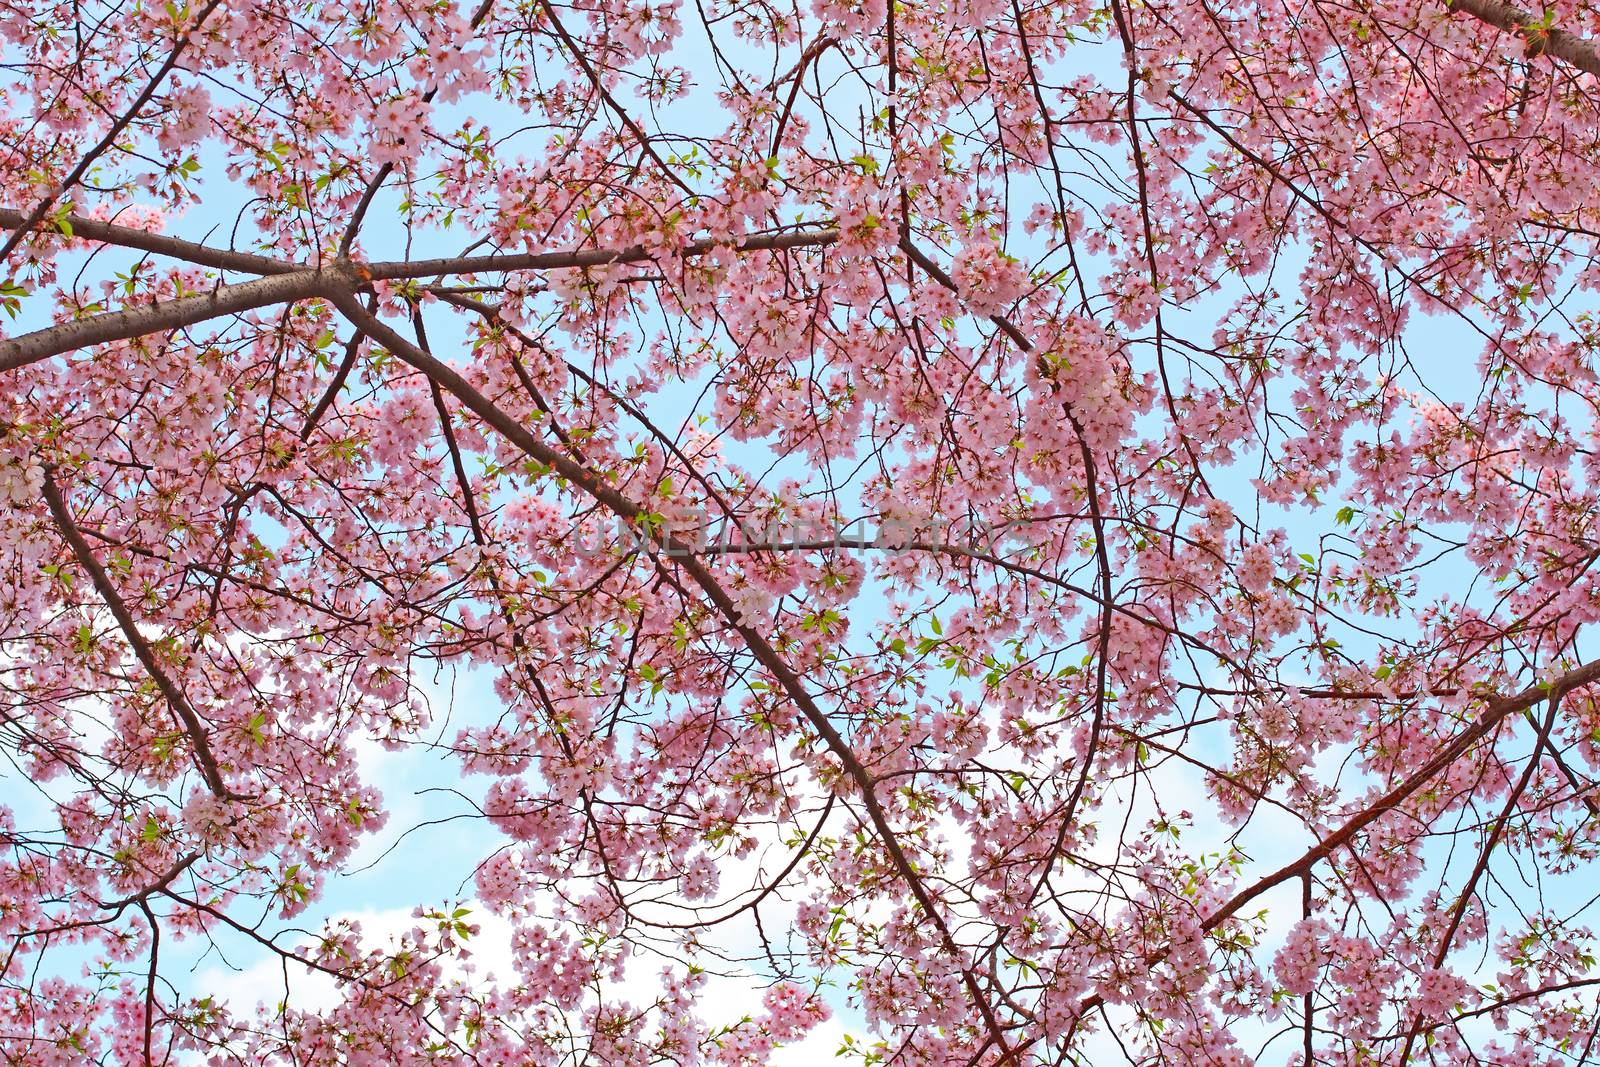 Beautiful pink cherry blossoms reach toward a warm spring sky.